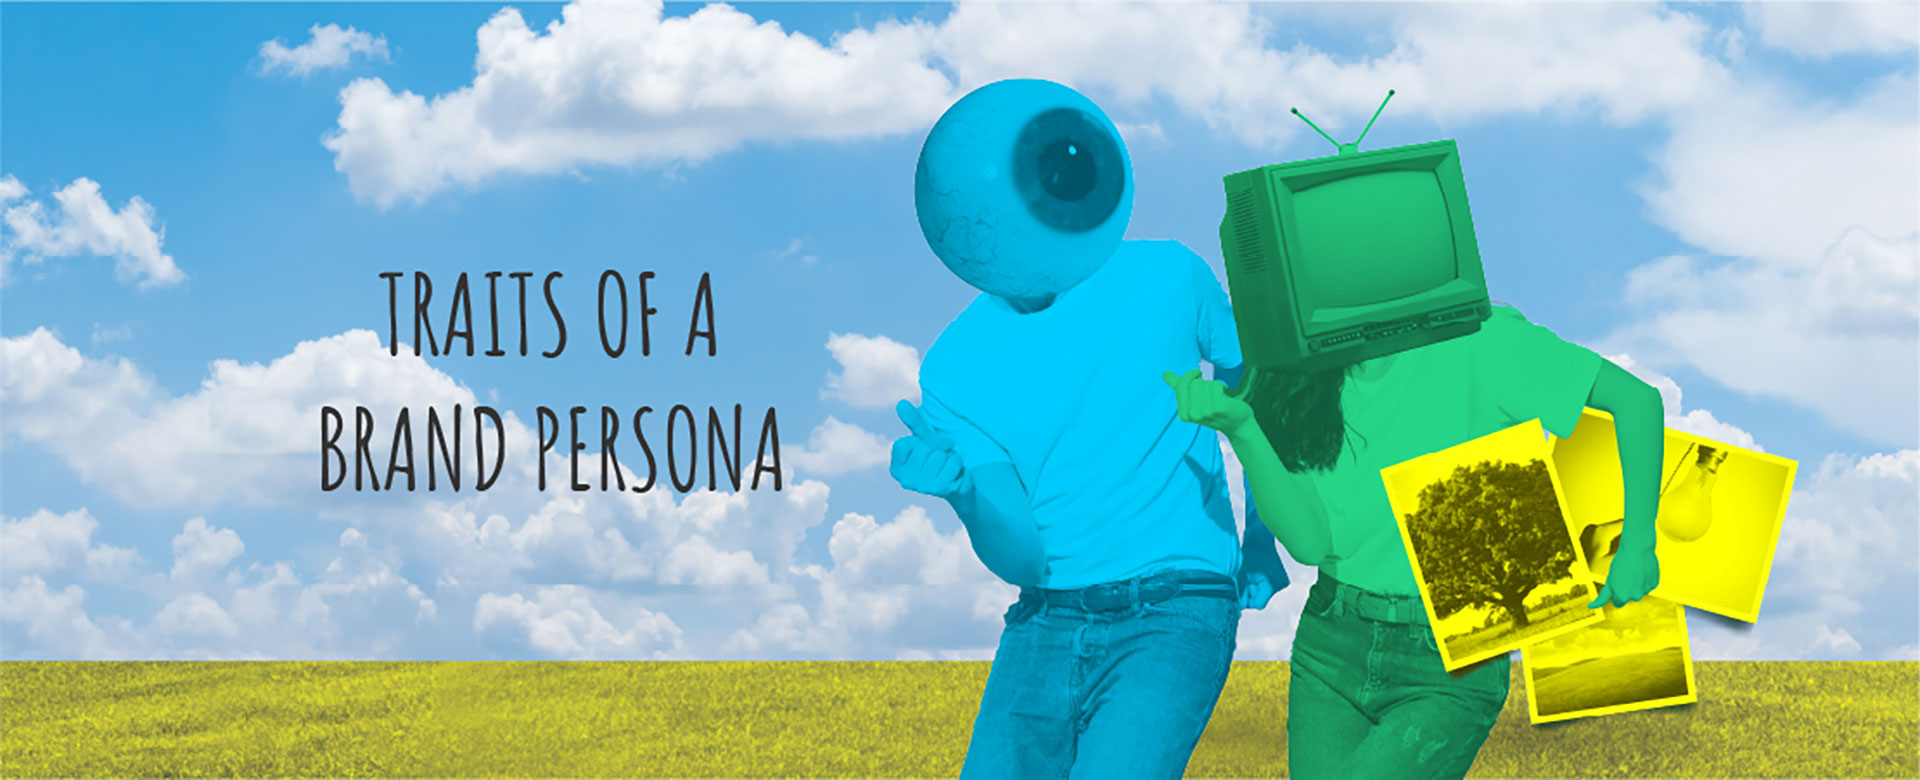 Traits of a Brand Persona